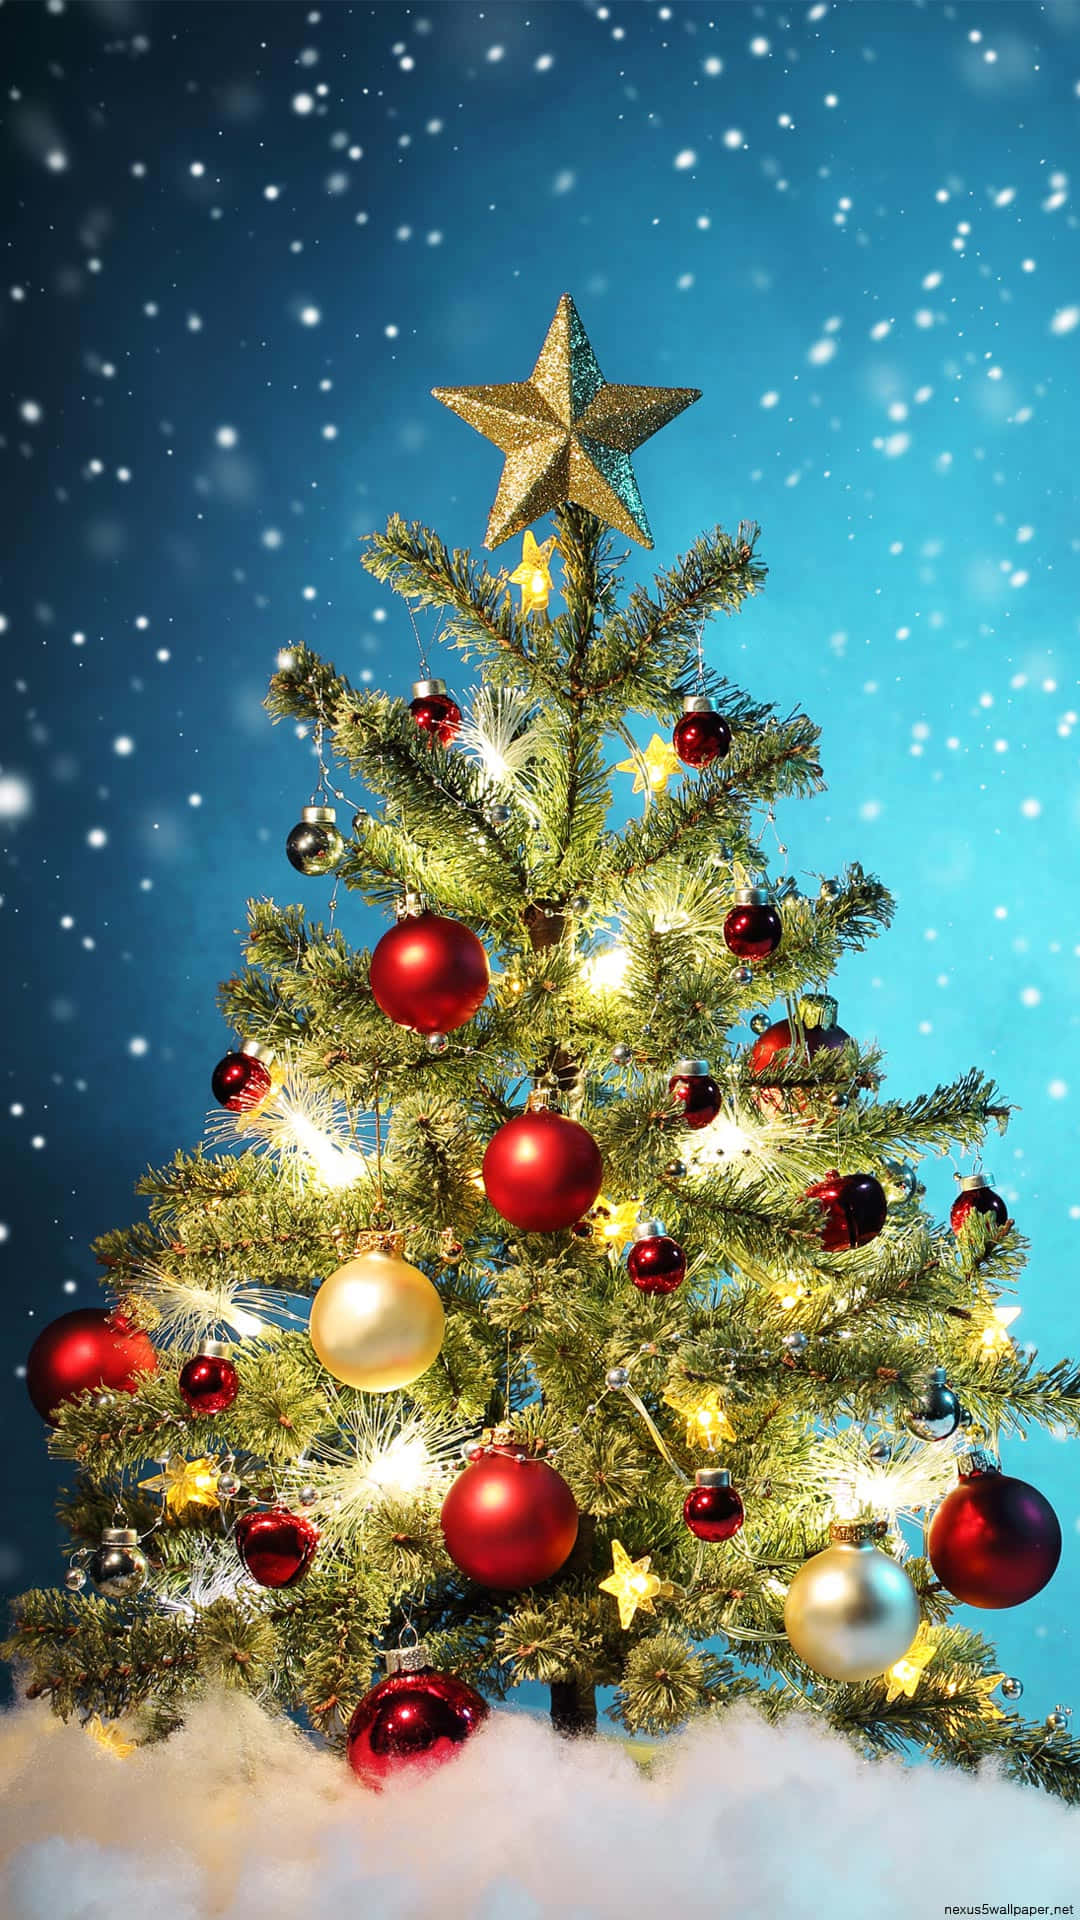 Cute Christmas Tree With Red Balls Wallpaper